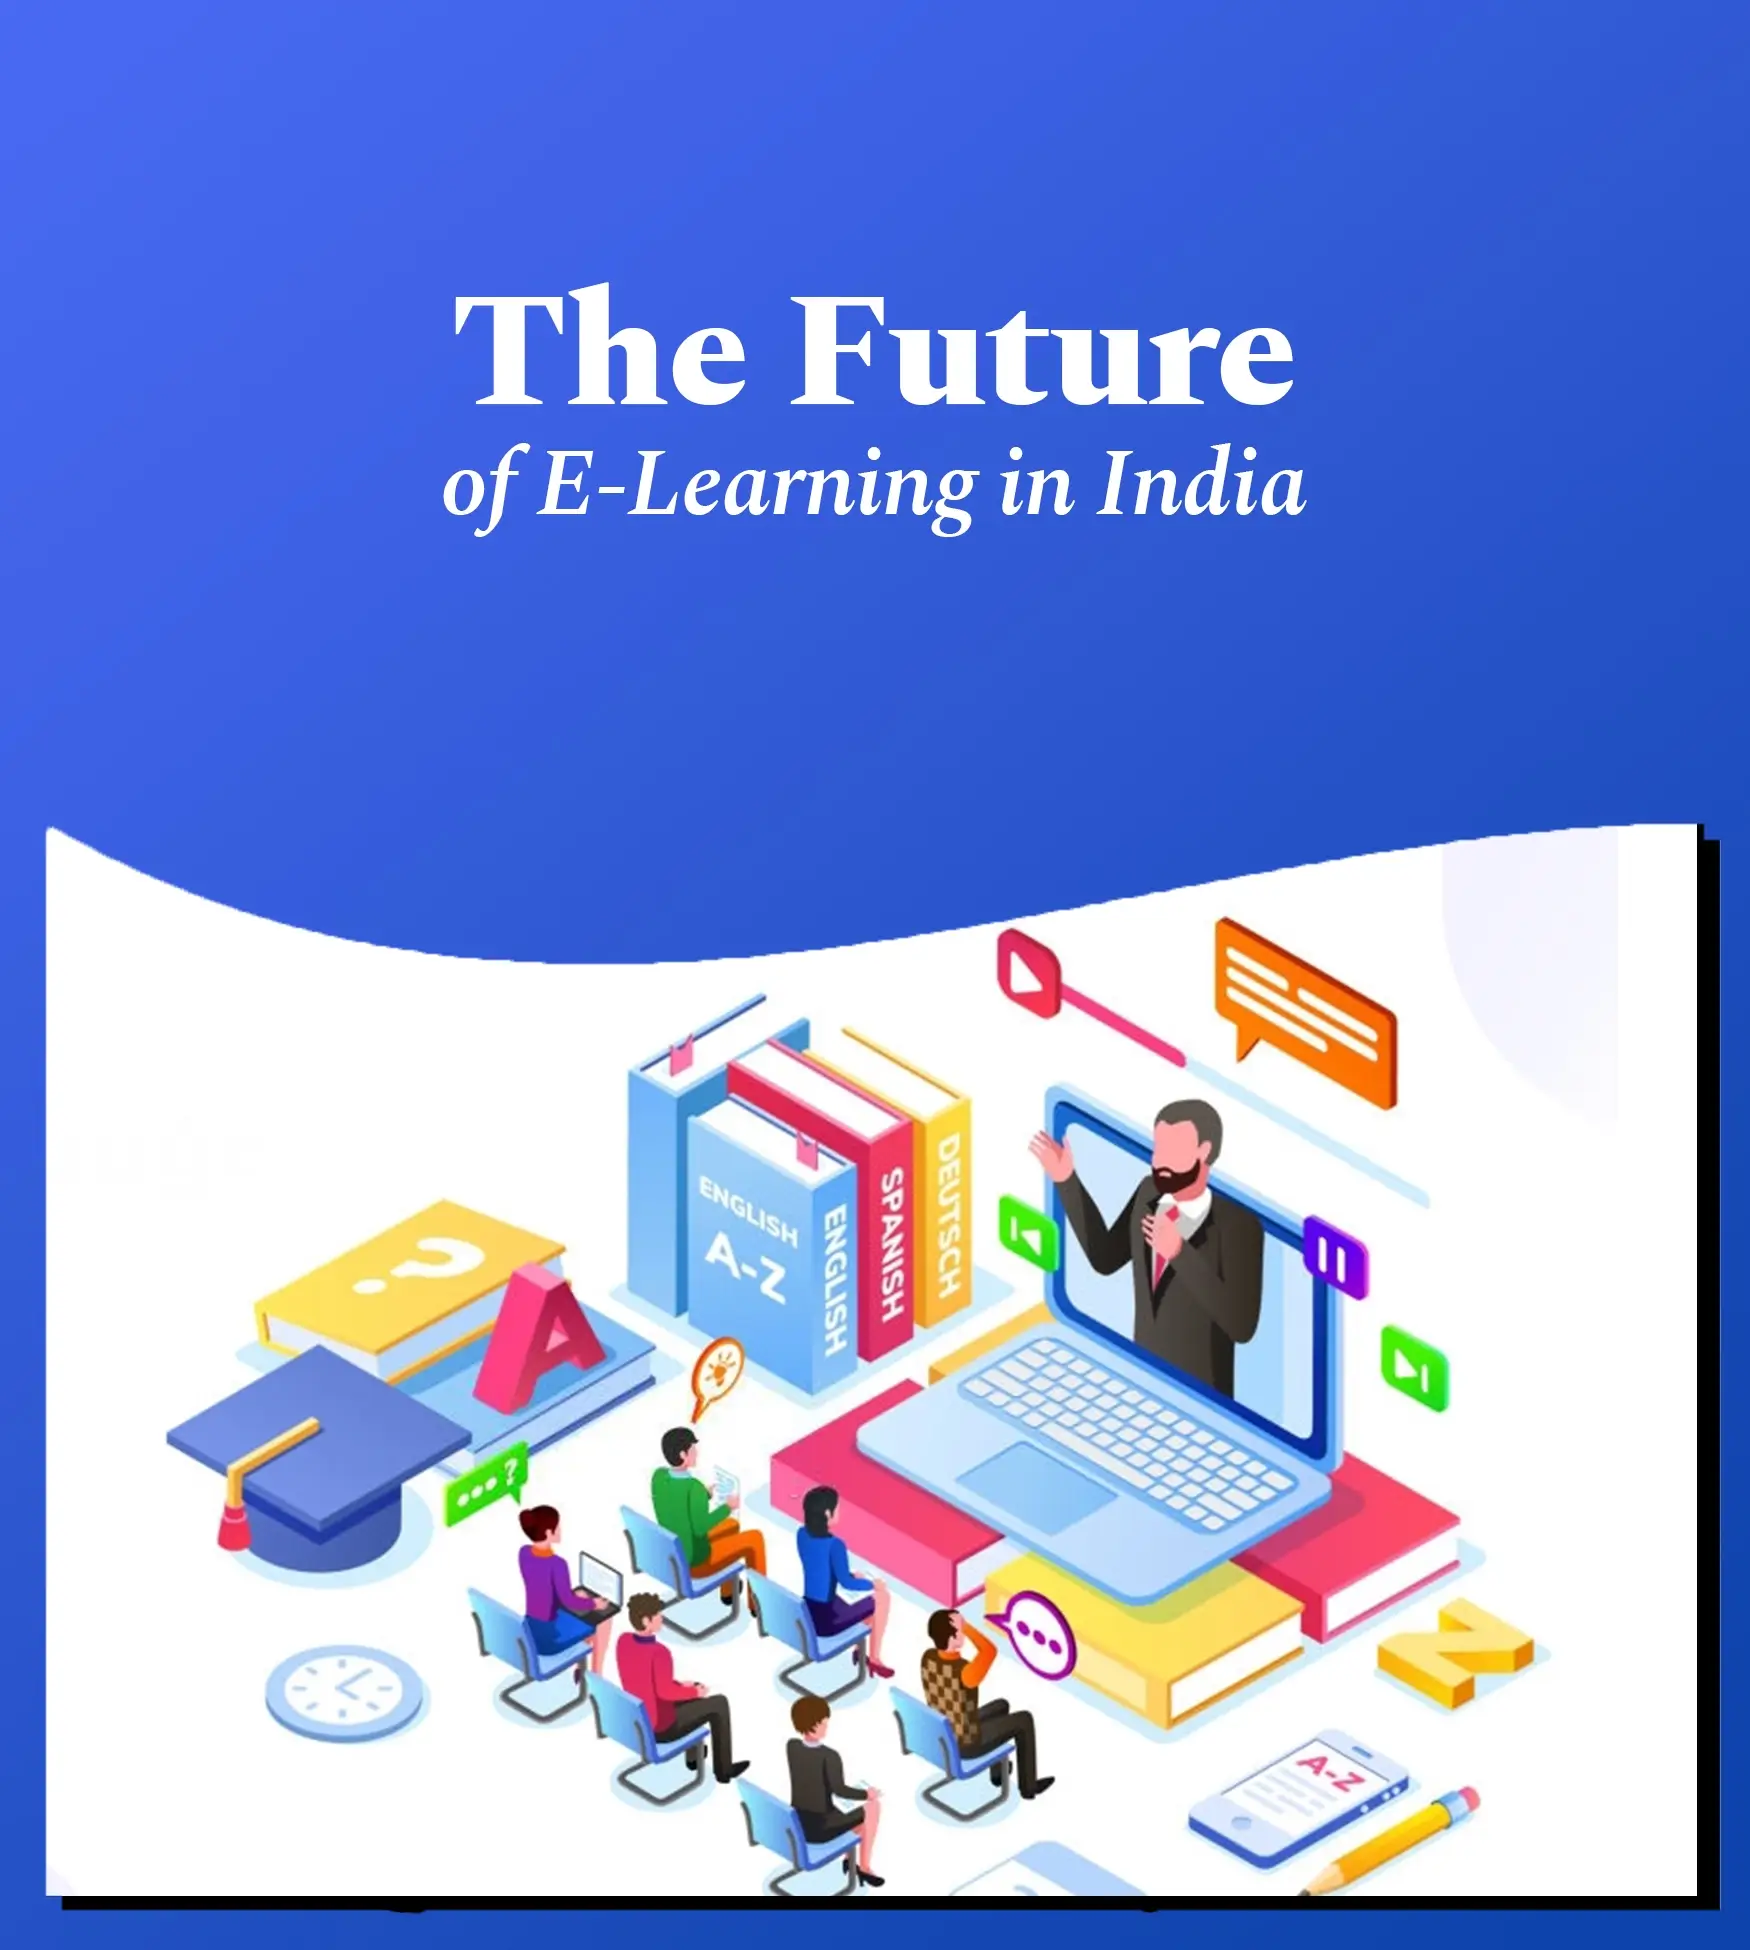 Online-Teaching-platforms-in-India-are-the-future-of-E-Learning 